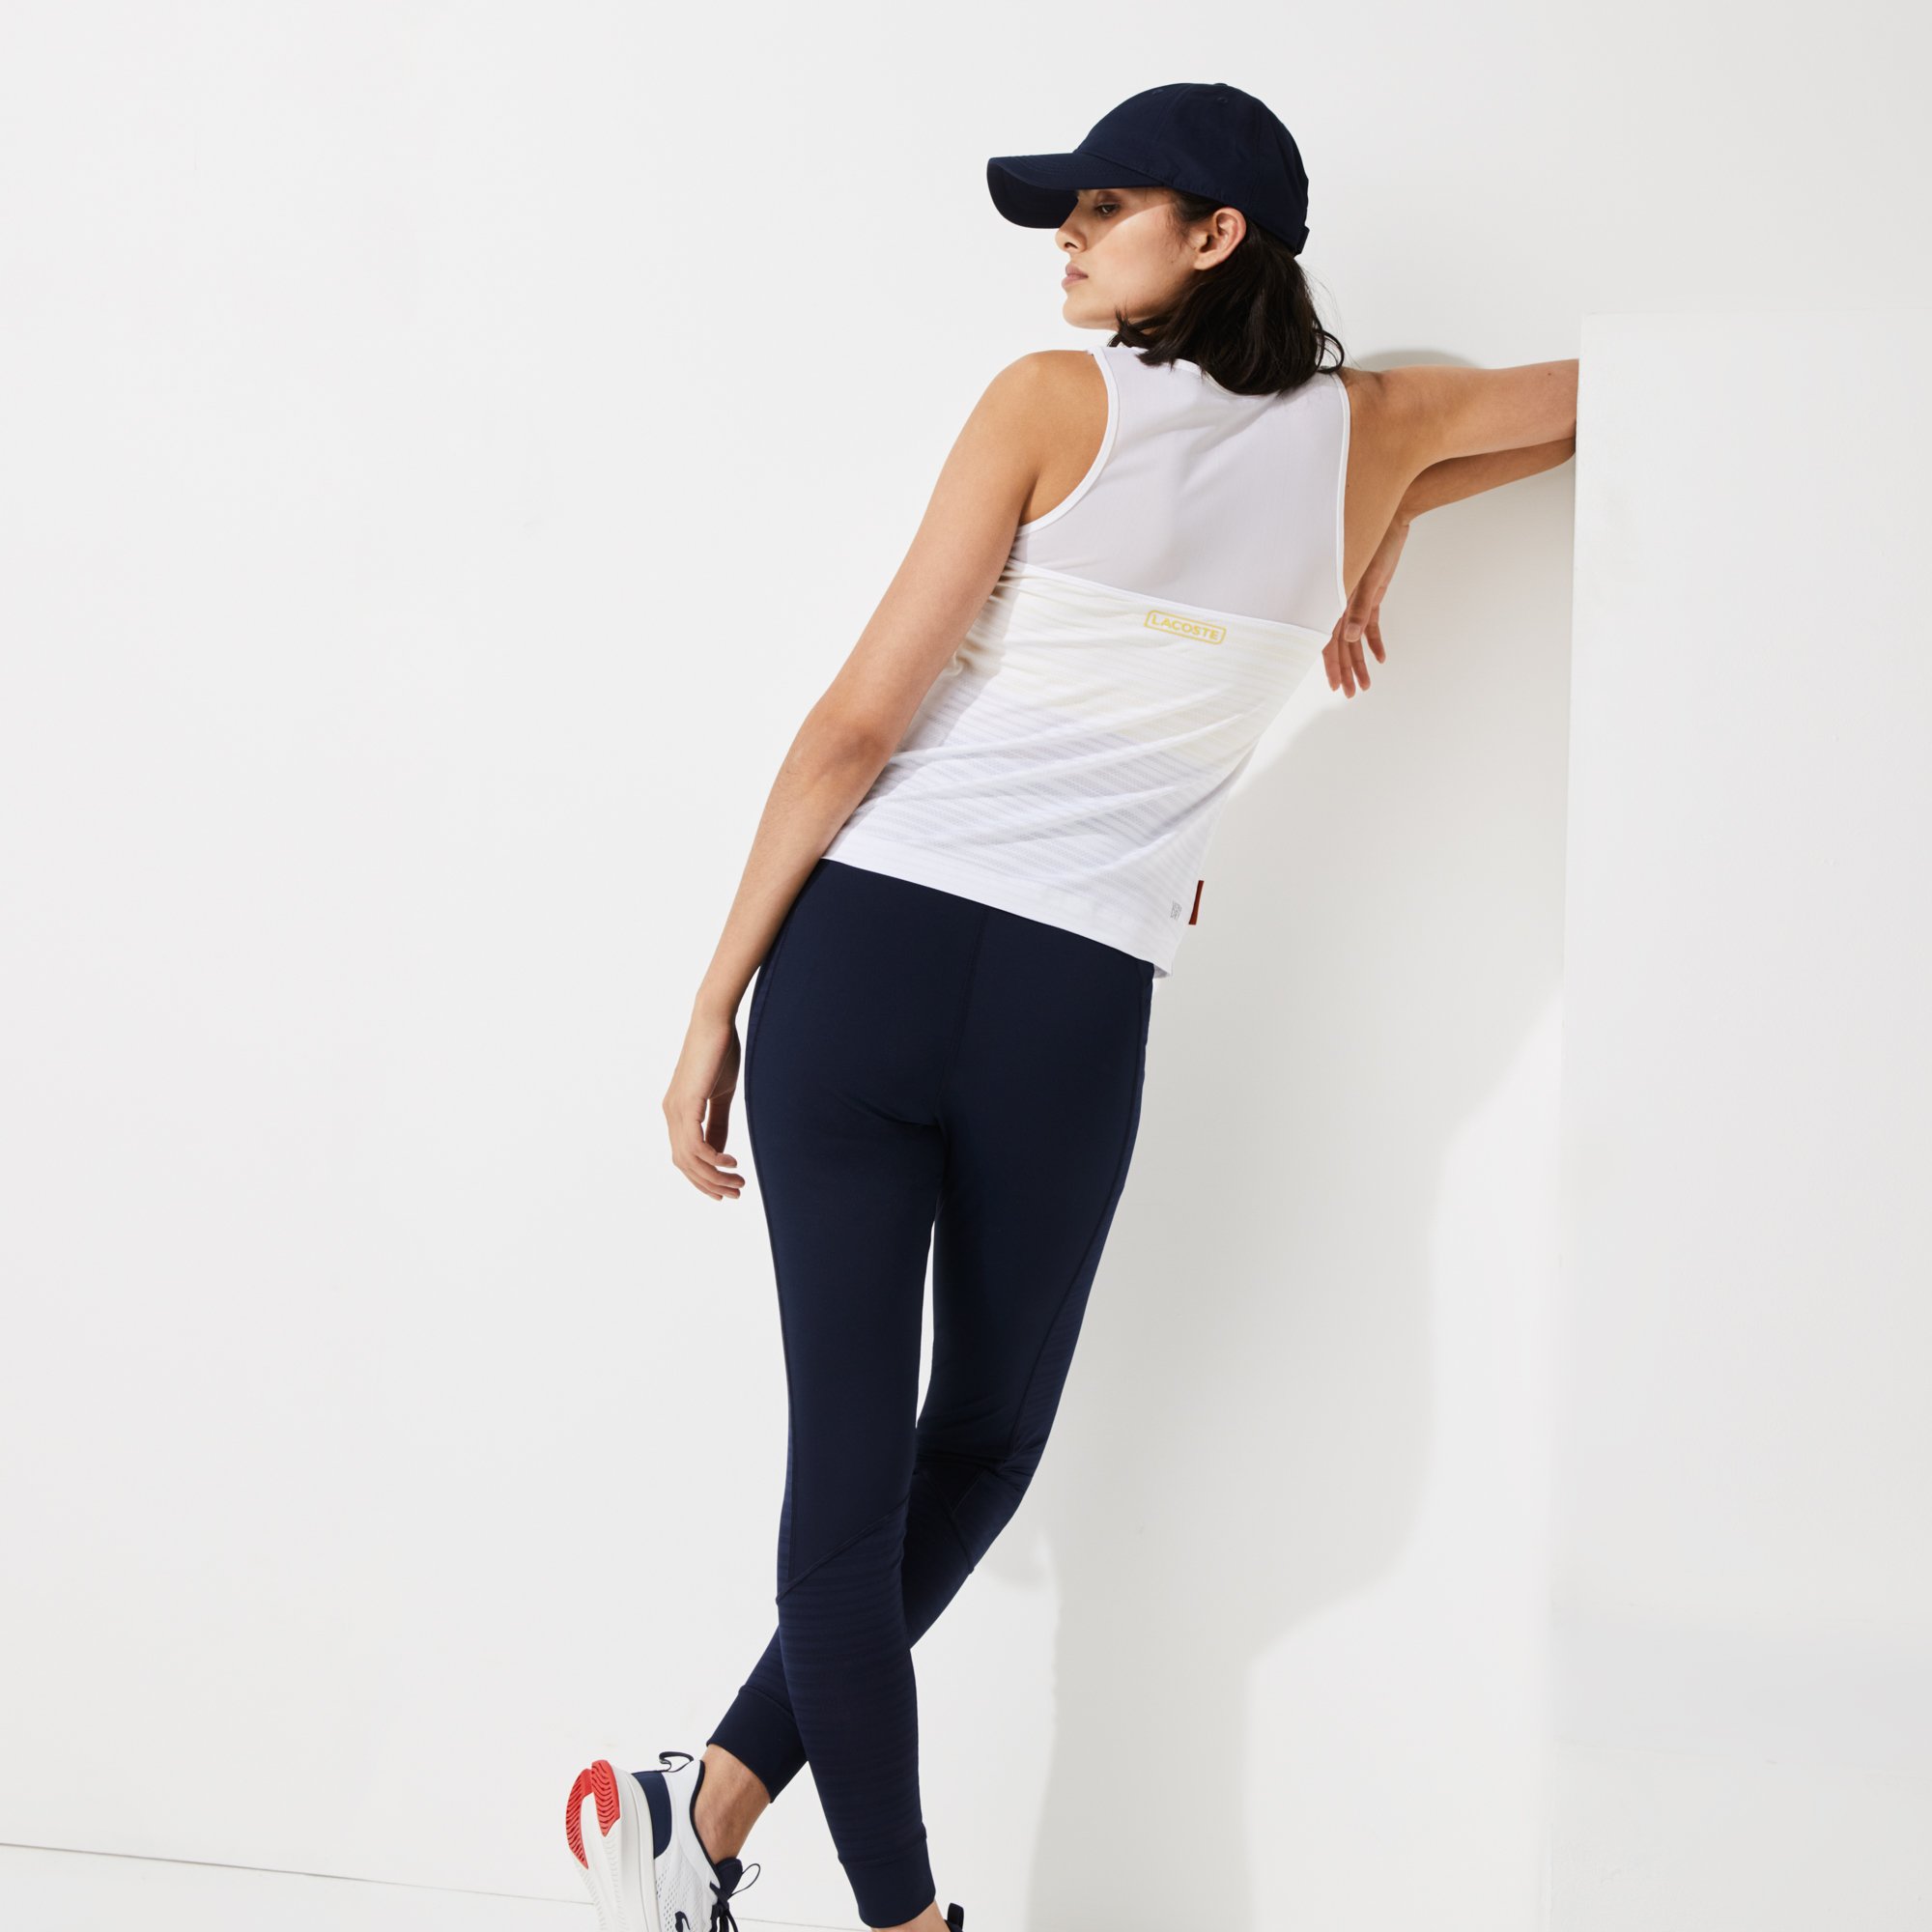 Gymshark's first-ever supply chain chief is former Lacoste exec Madelaine -  Just Style